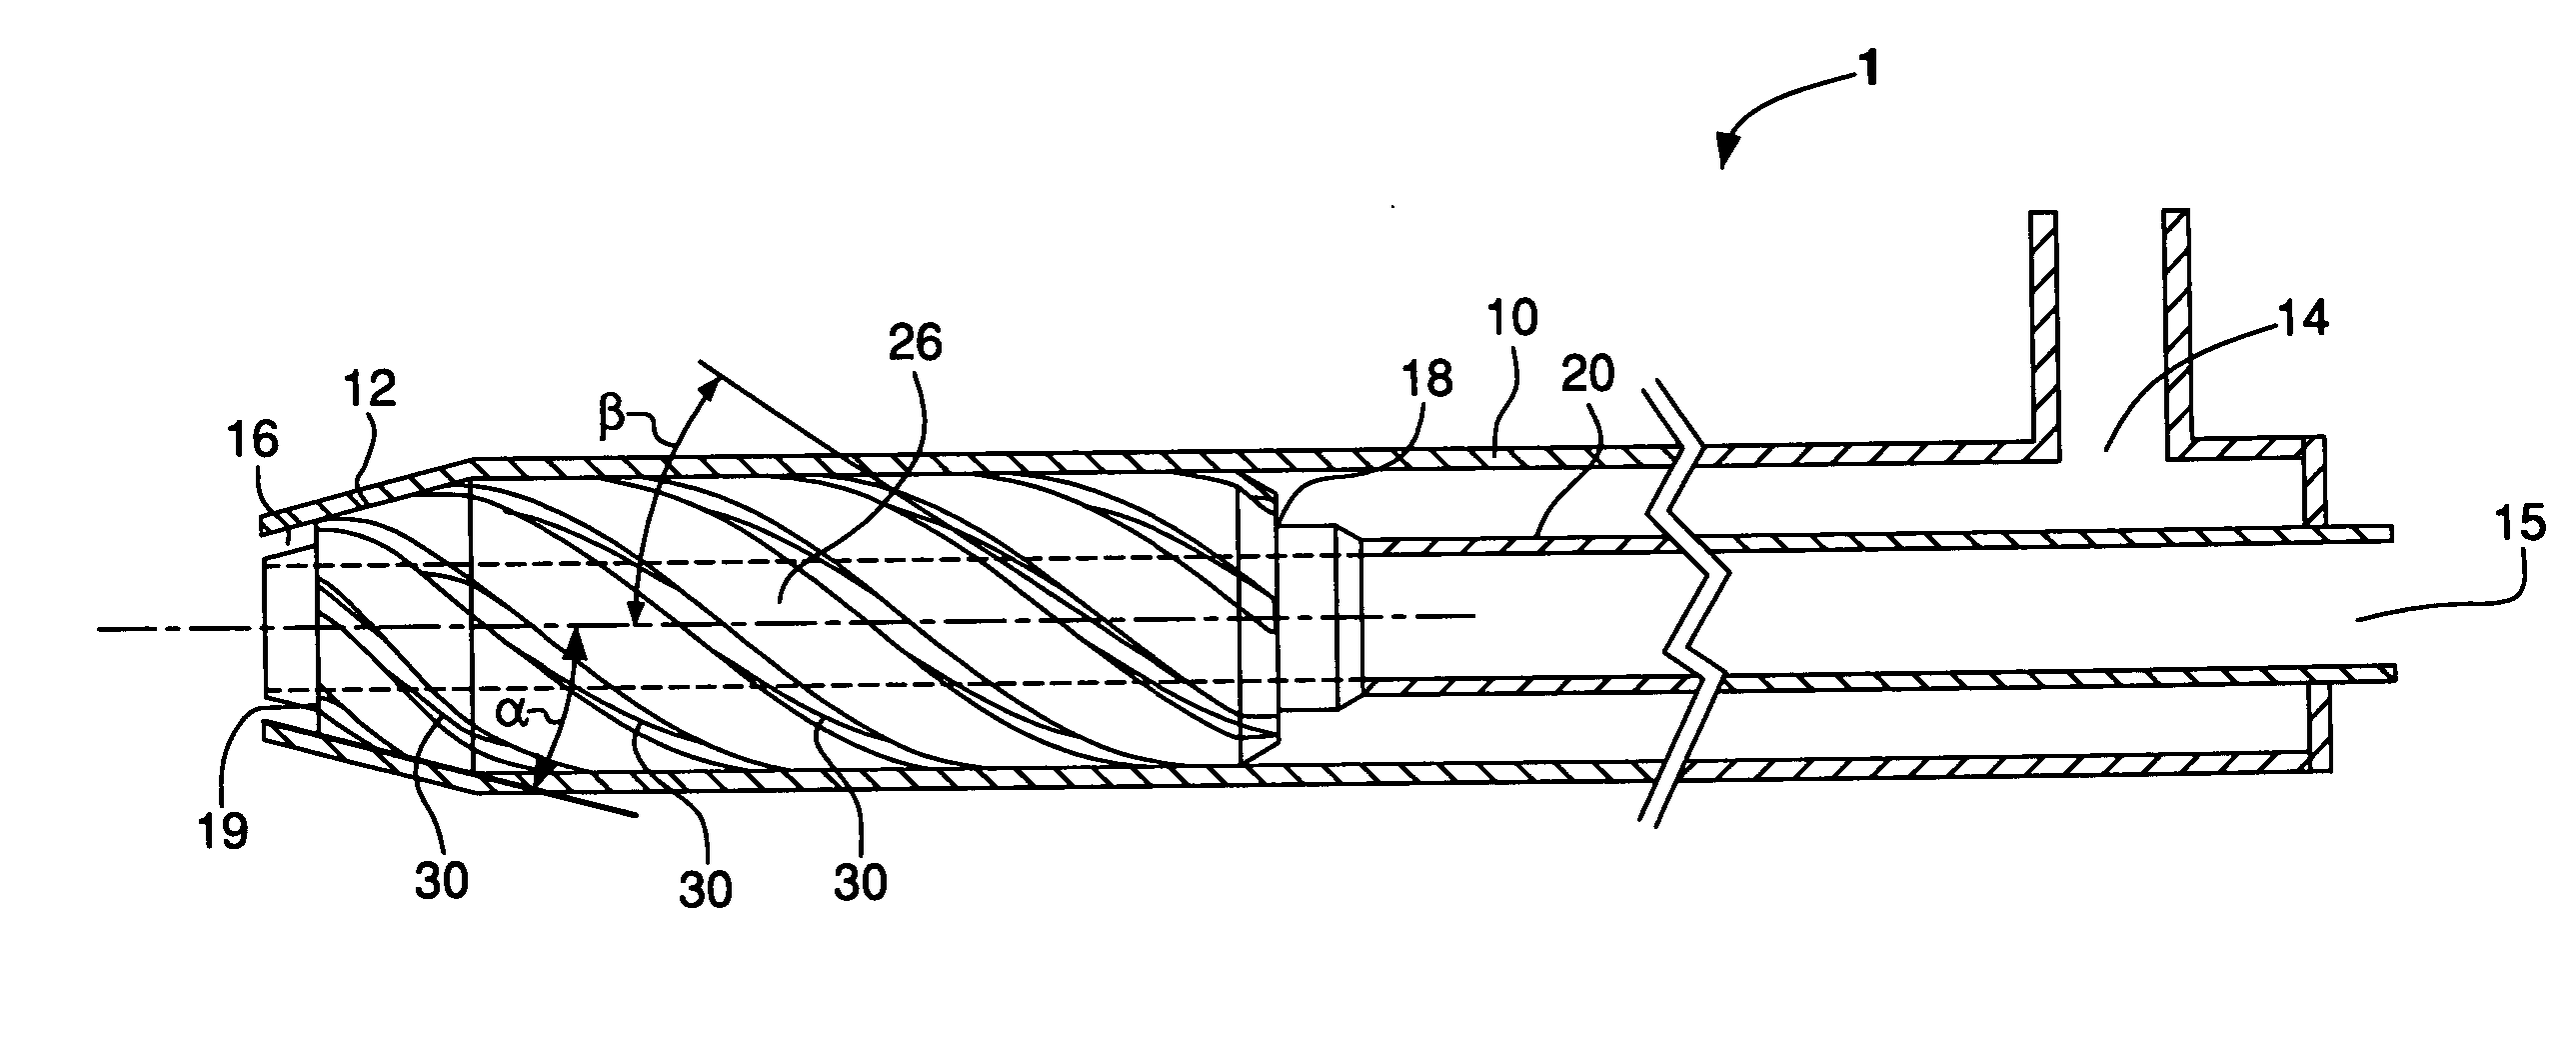 Oxidant-swirled fossil fuel injector for a shaft furnace